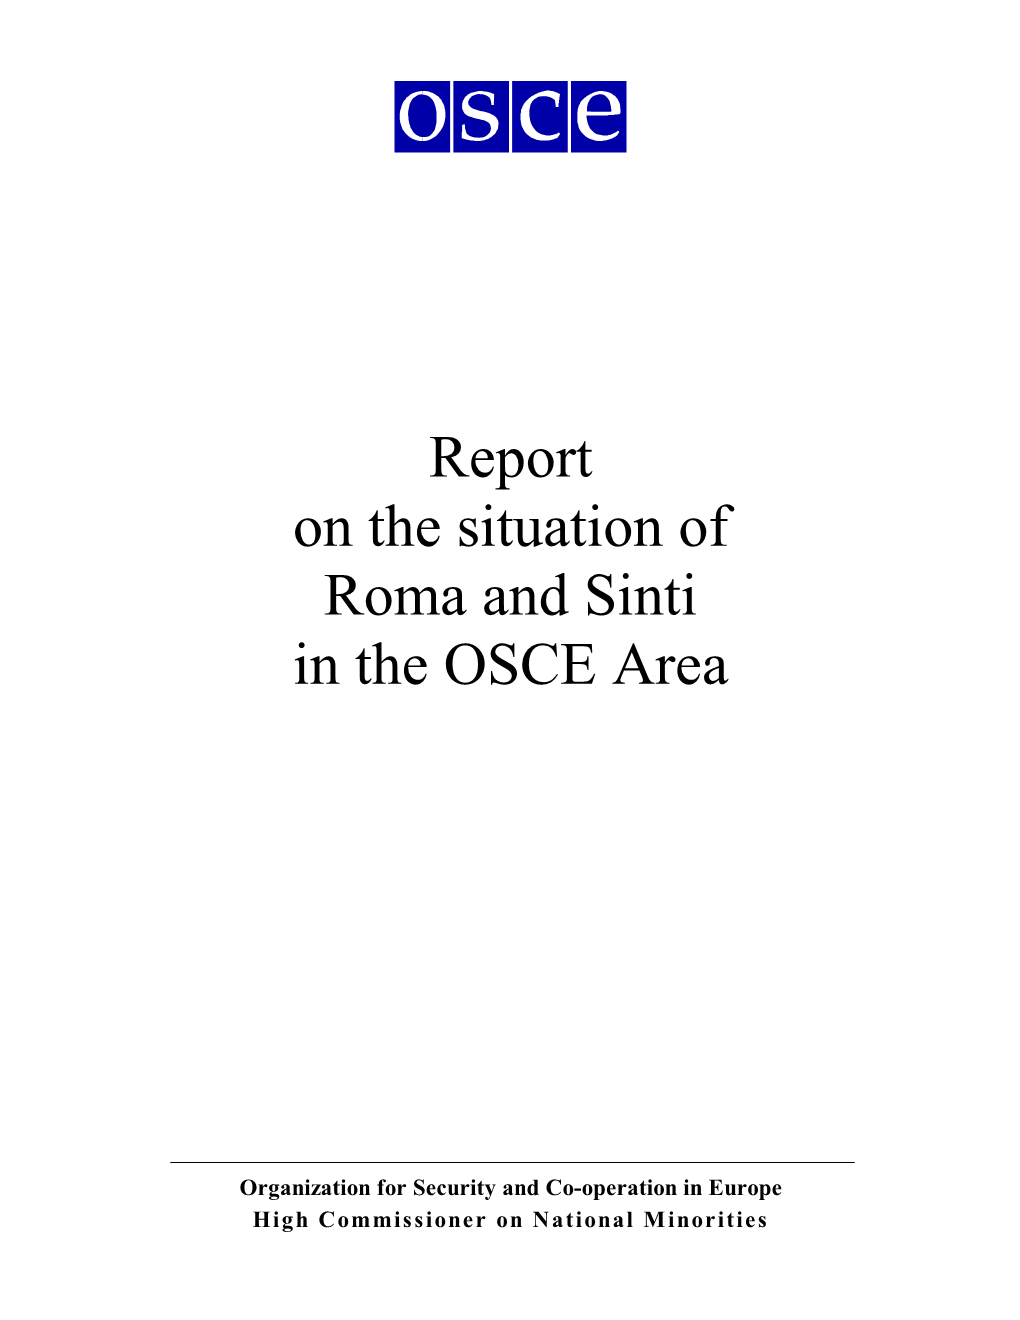 Report on the Situation of Roma and Sinti in the OSCE Area